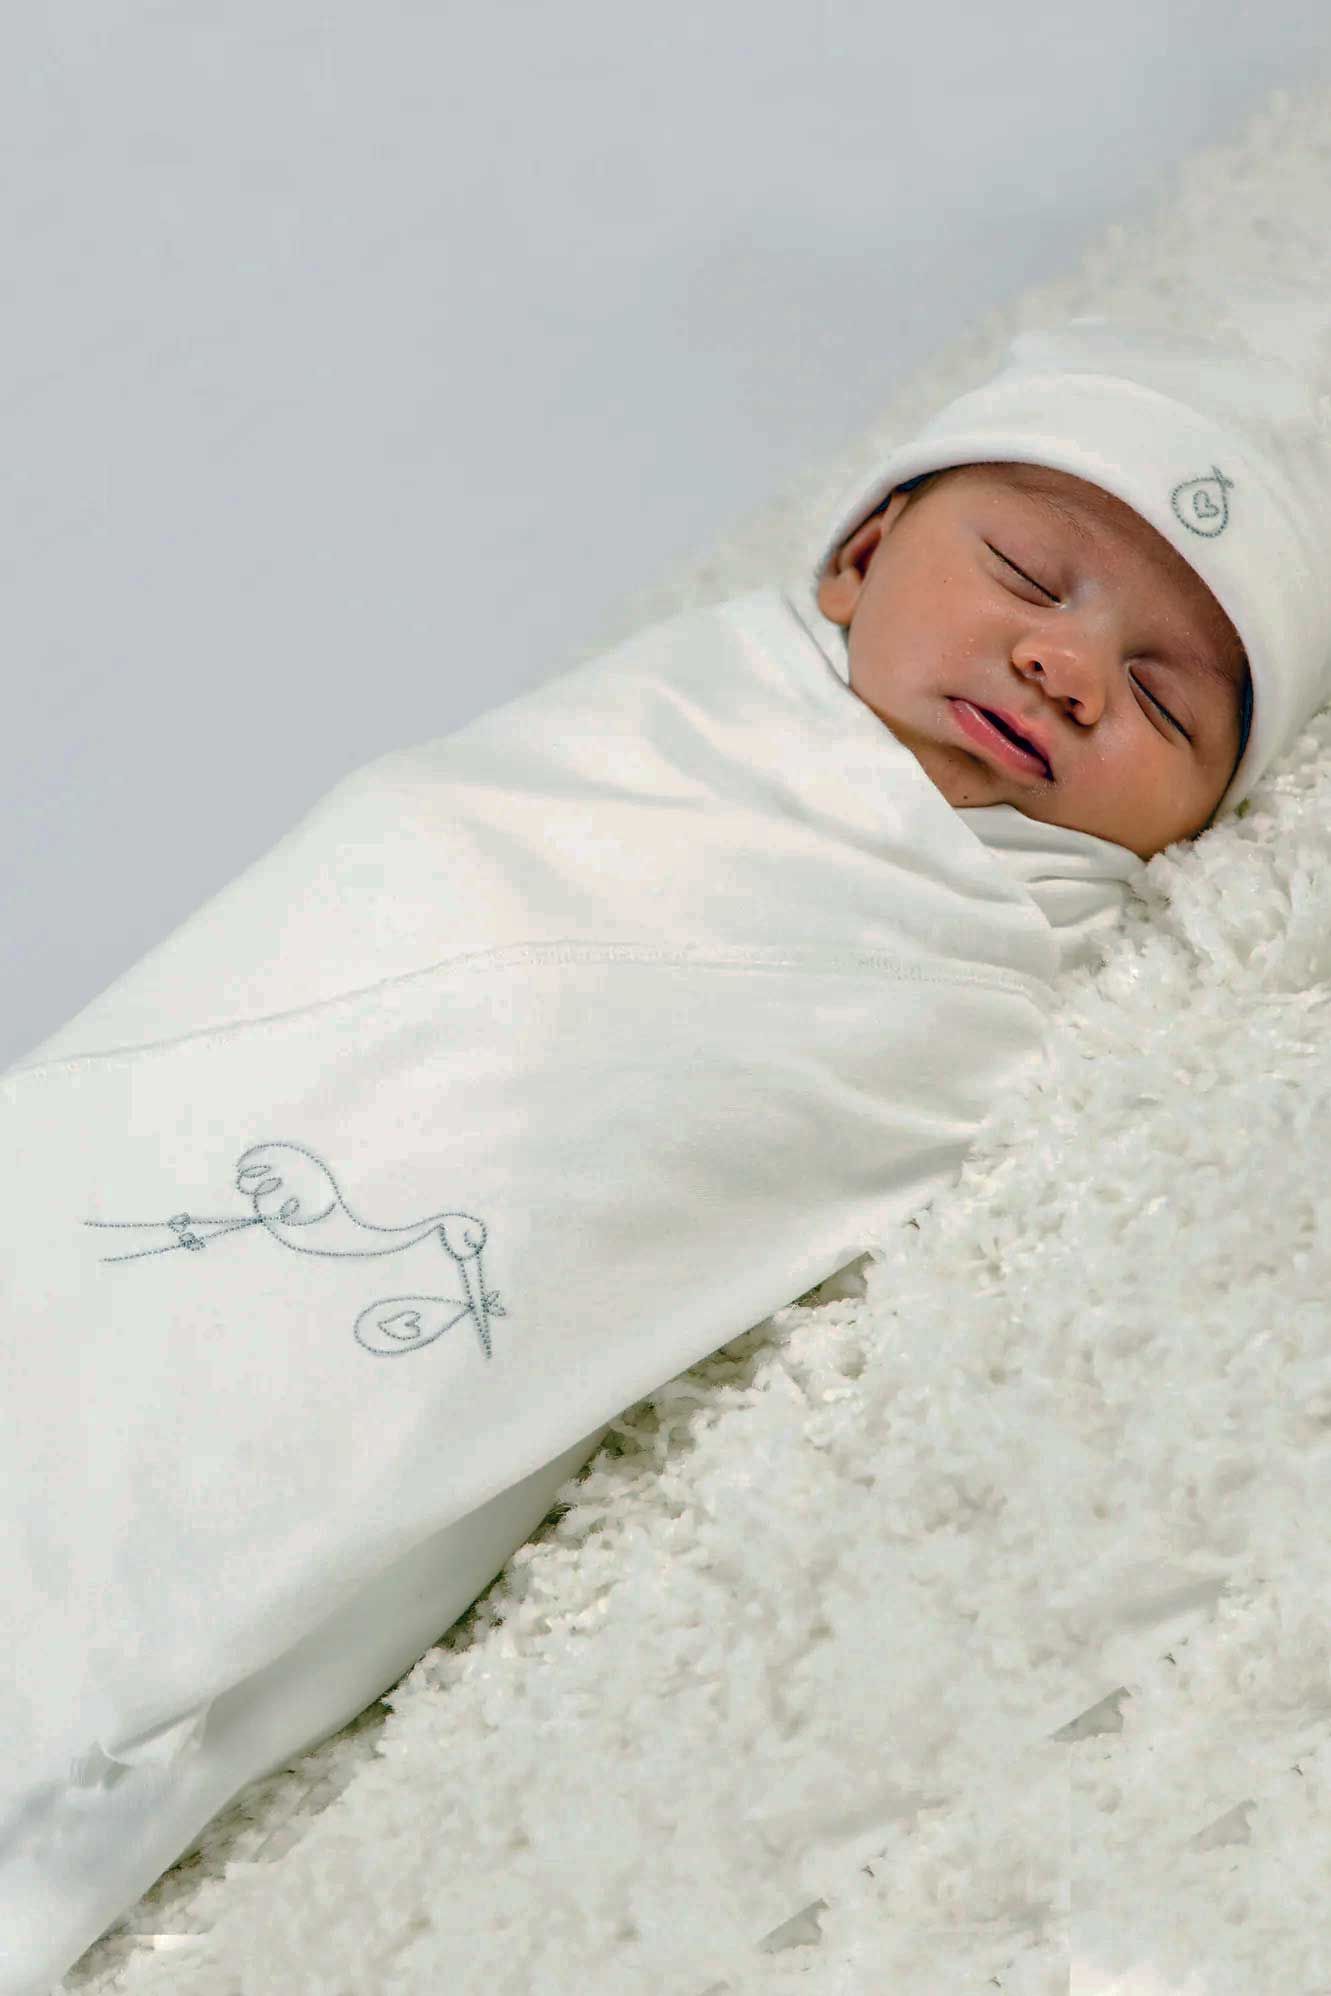 Under The Nile kid's gifts, blankets Organic Cotton Swaddle Blanket